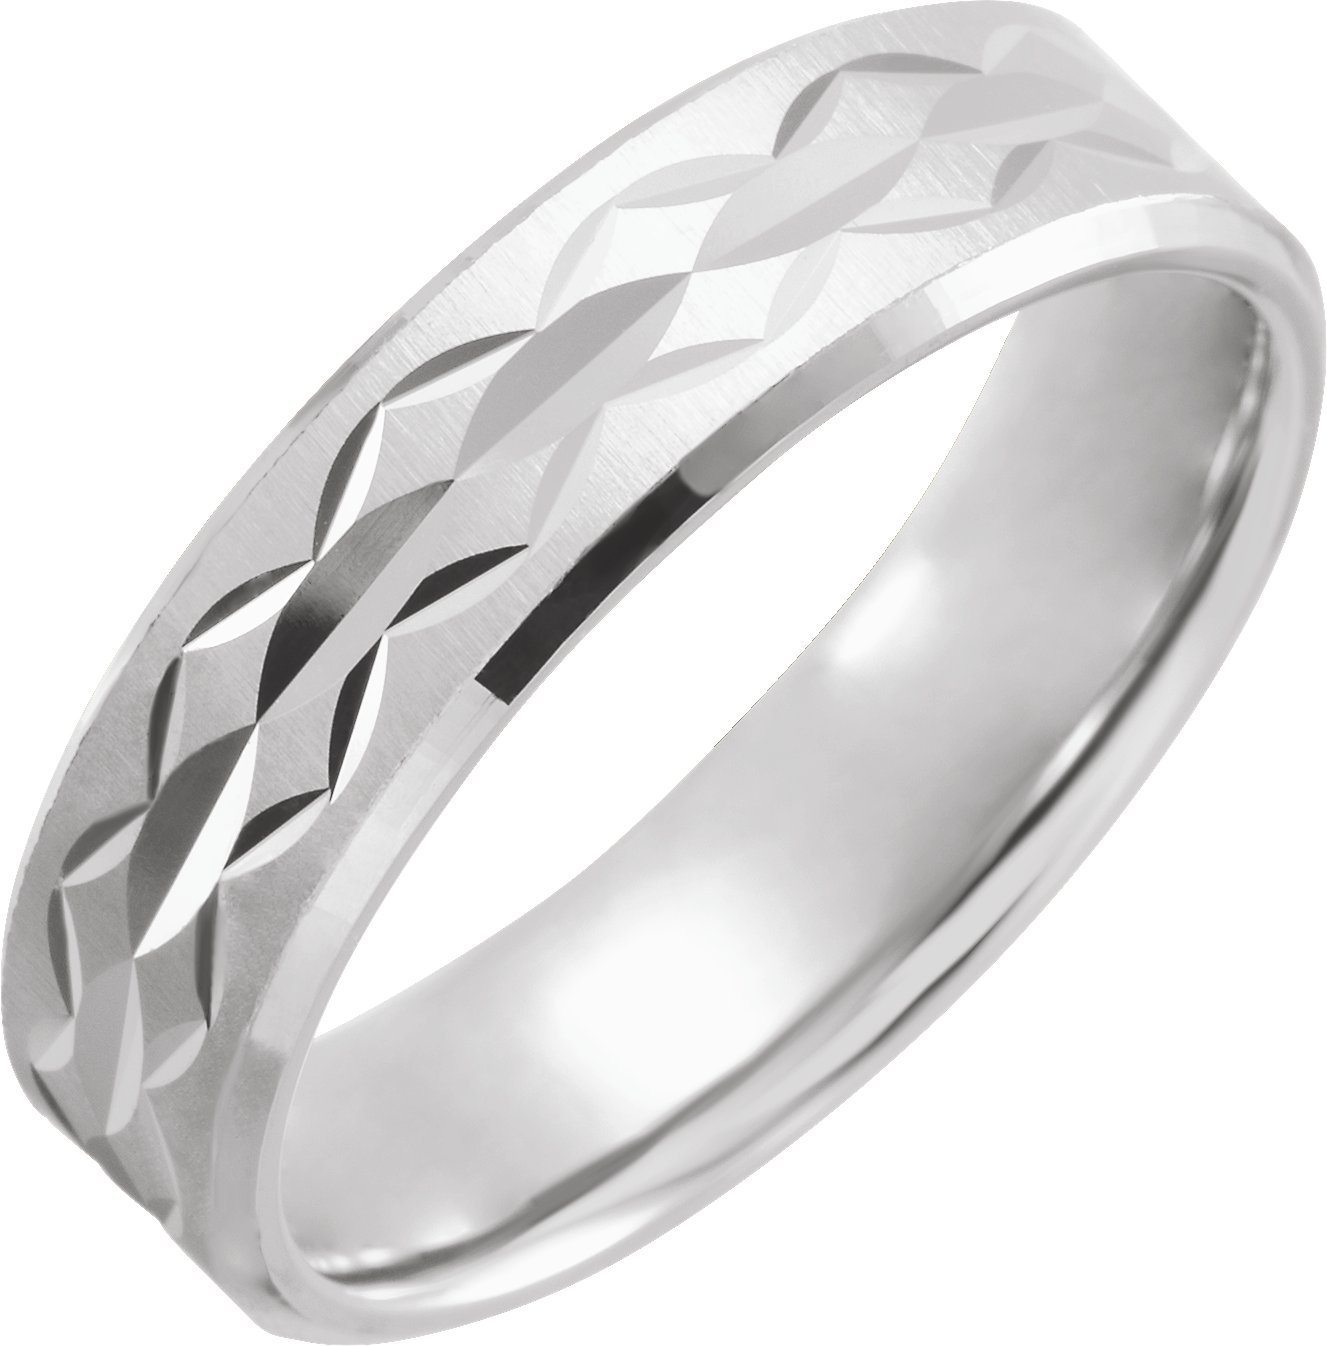 Sterling Silver 6 mm Design Band with Satin Polished Finish Size 6.5 Ref 16486099